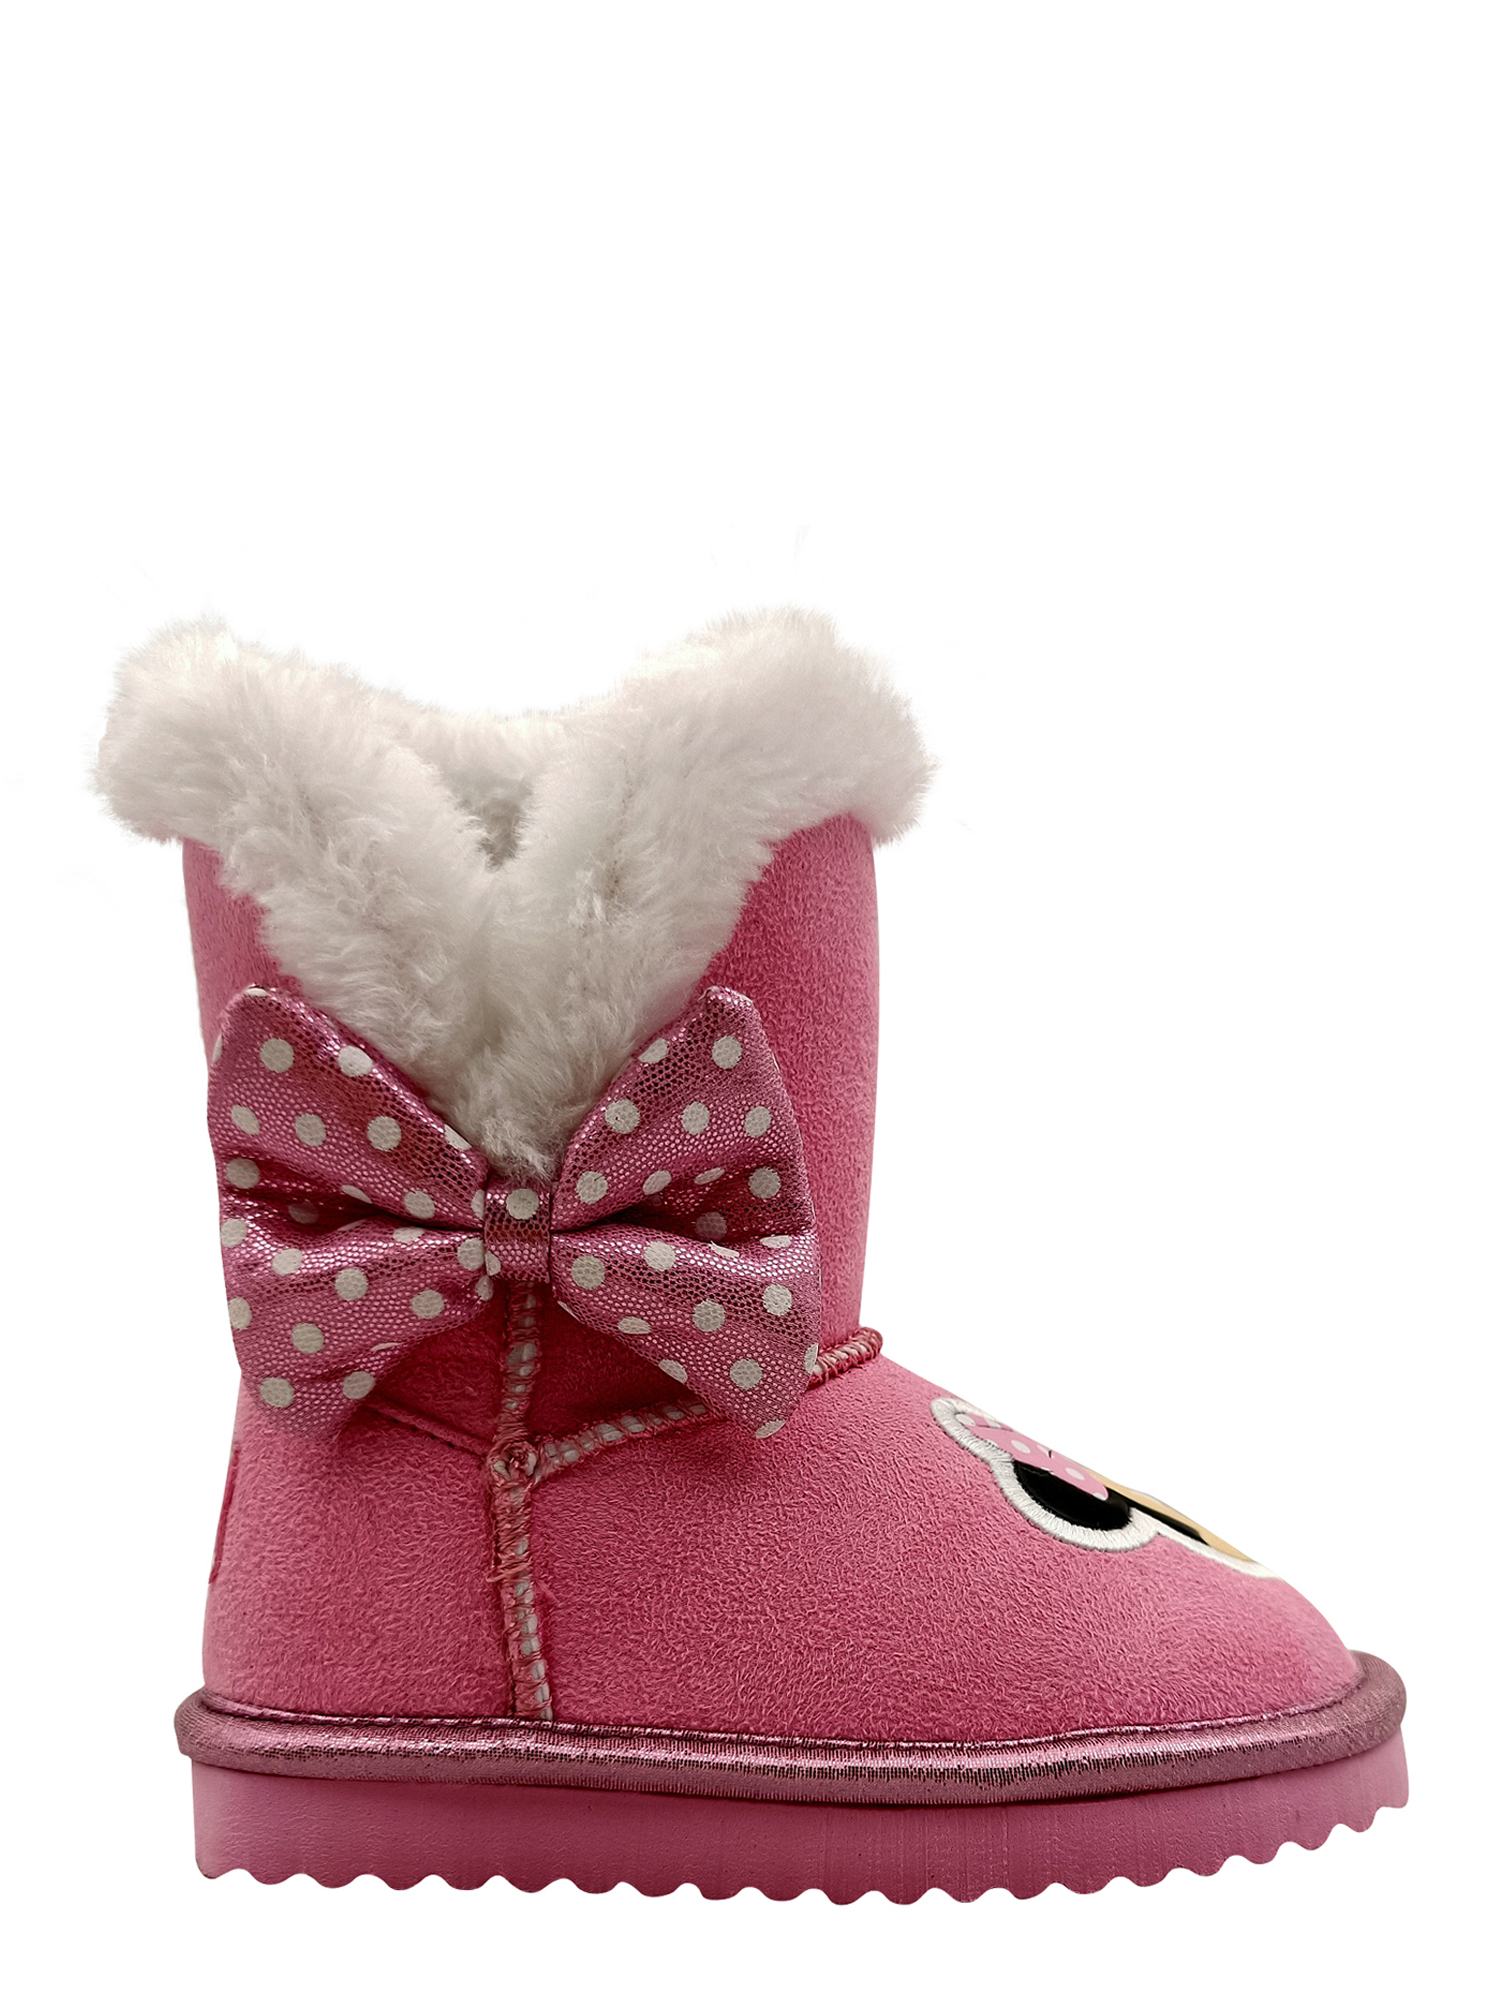 Disney Minnie Mouse Cozy Faux Shearling Winter Boot (Toddler Girls) - image 2 of 6